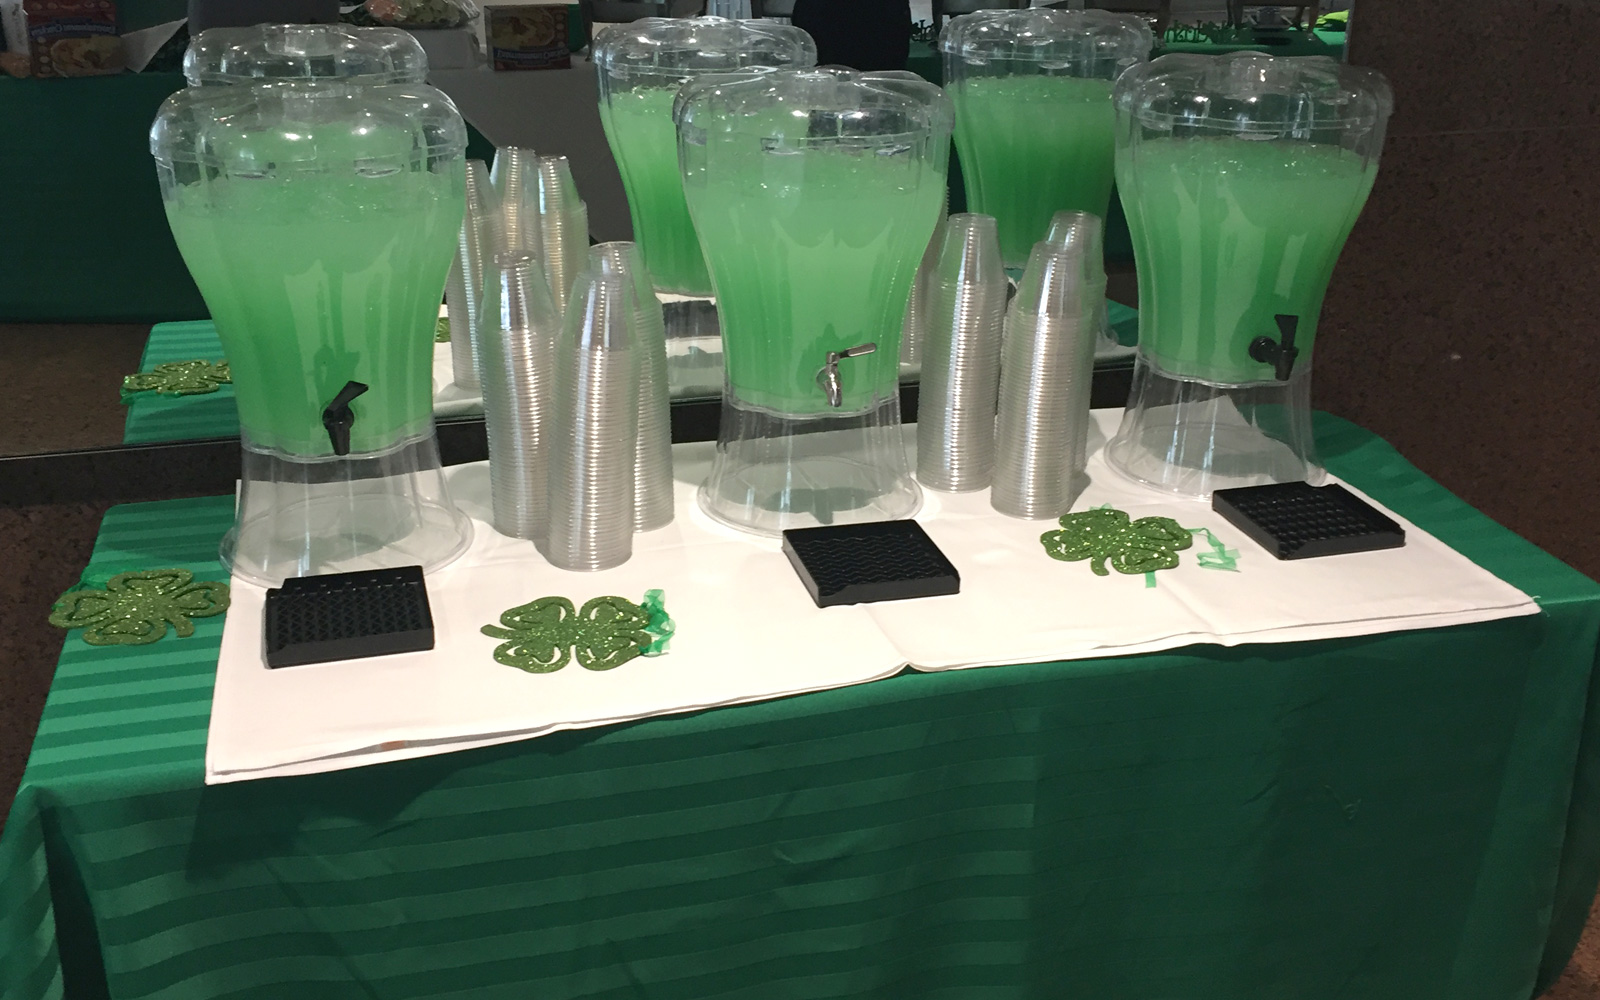 St. Patrick's Day at Metropoint